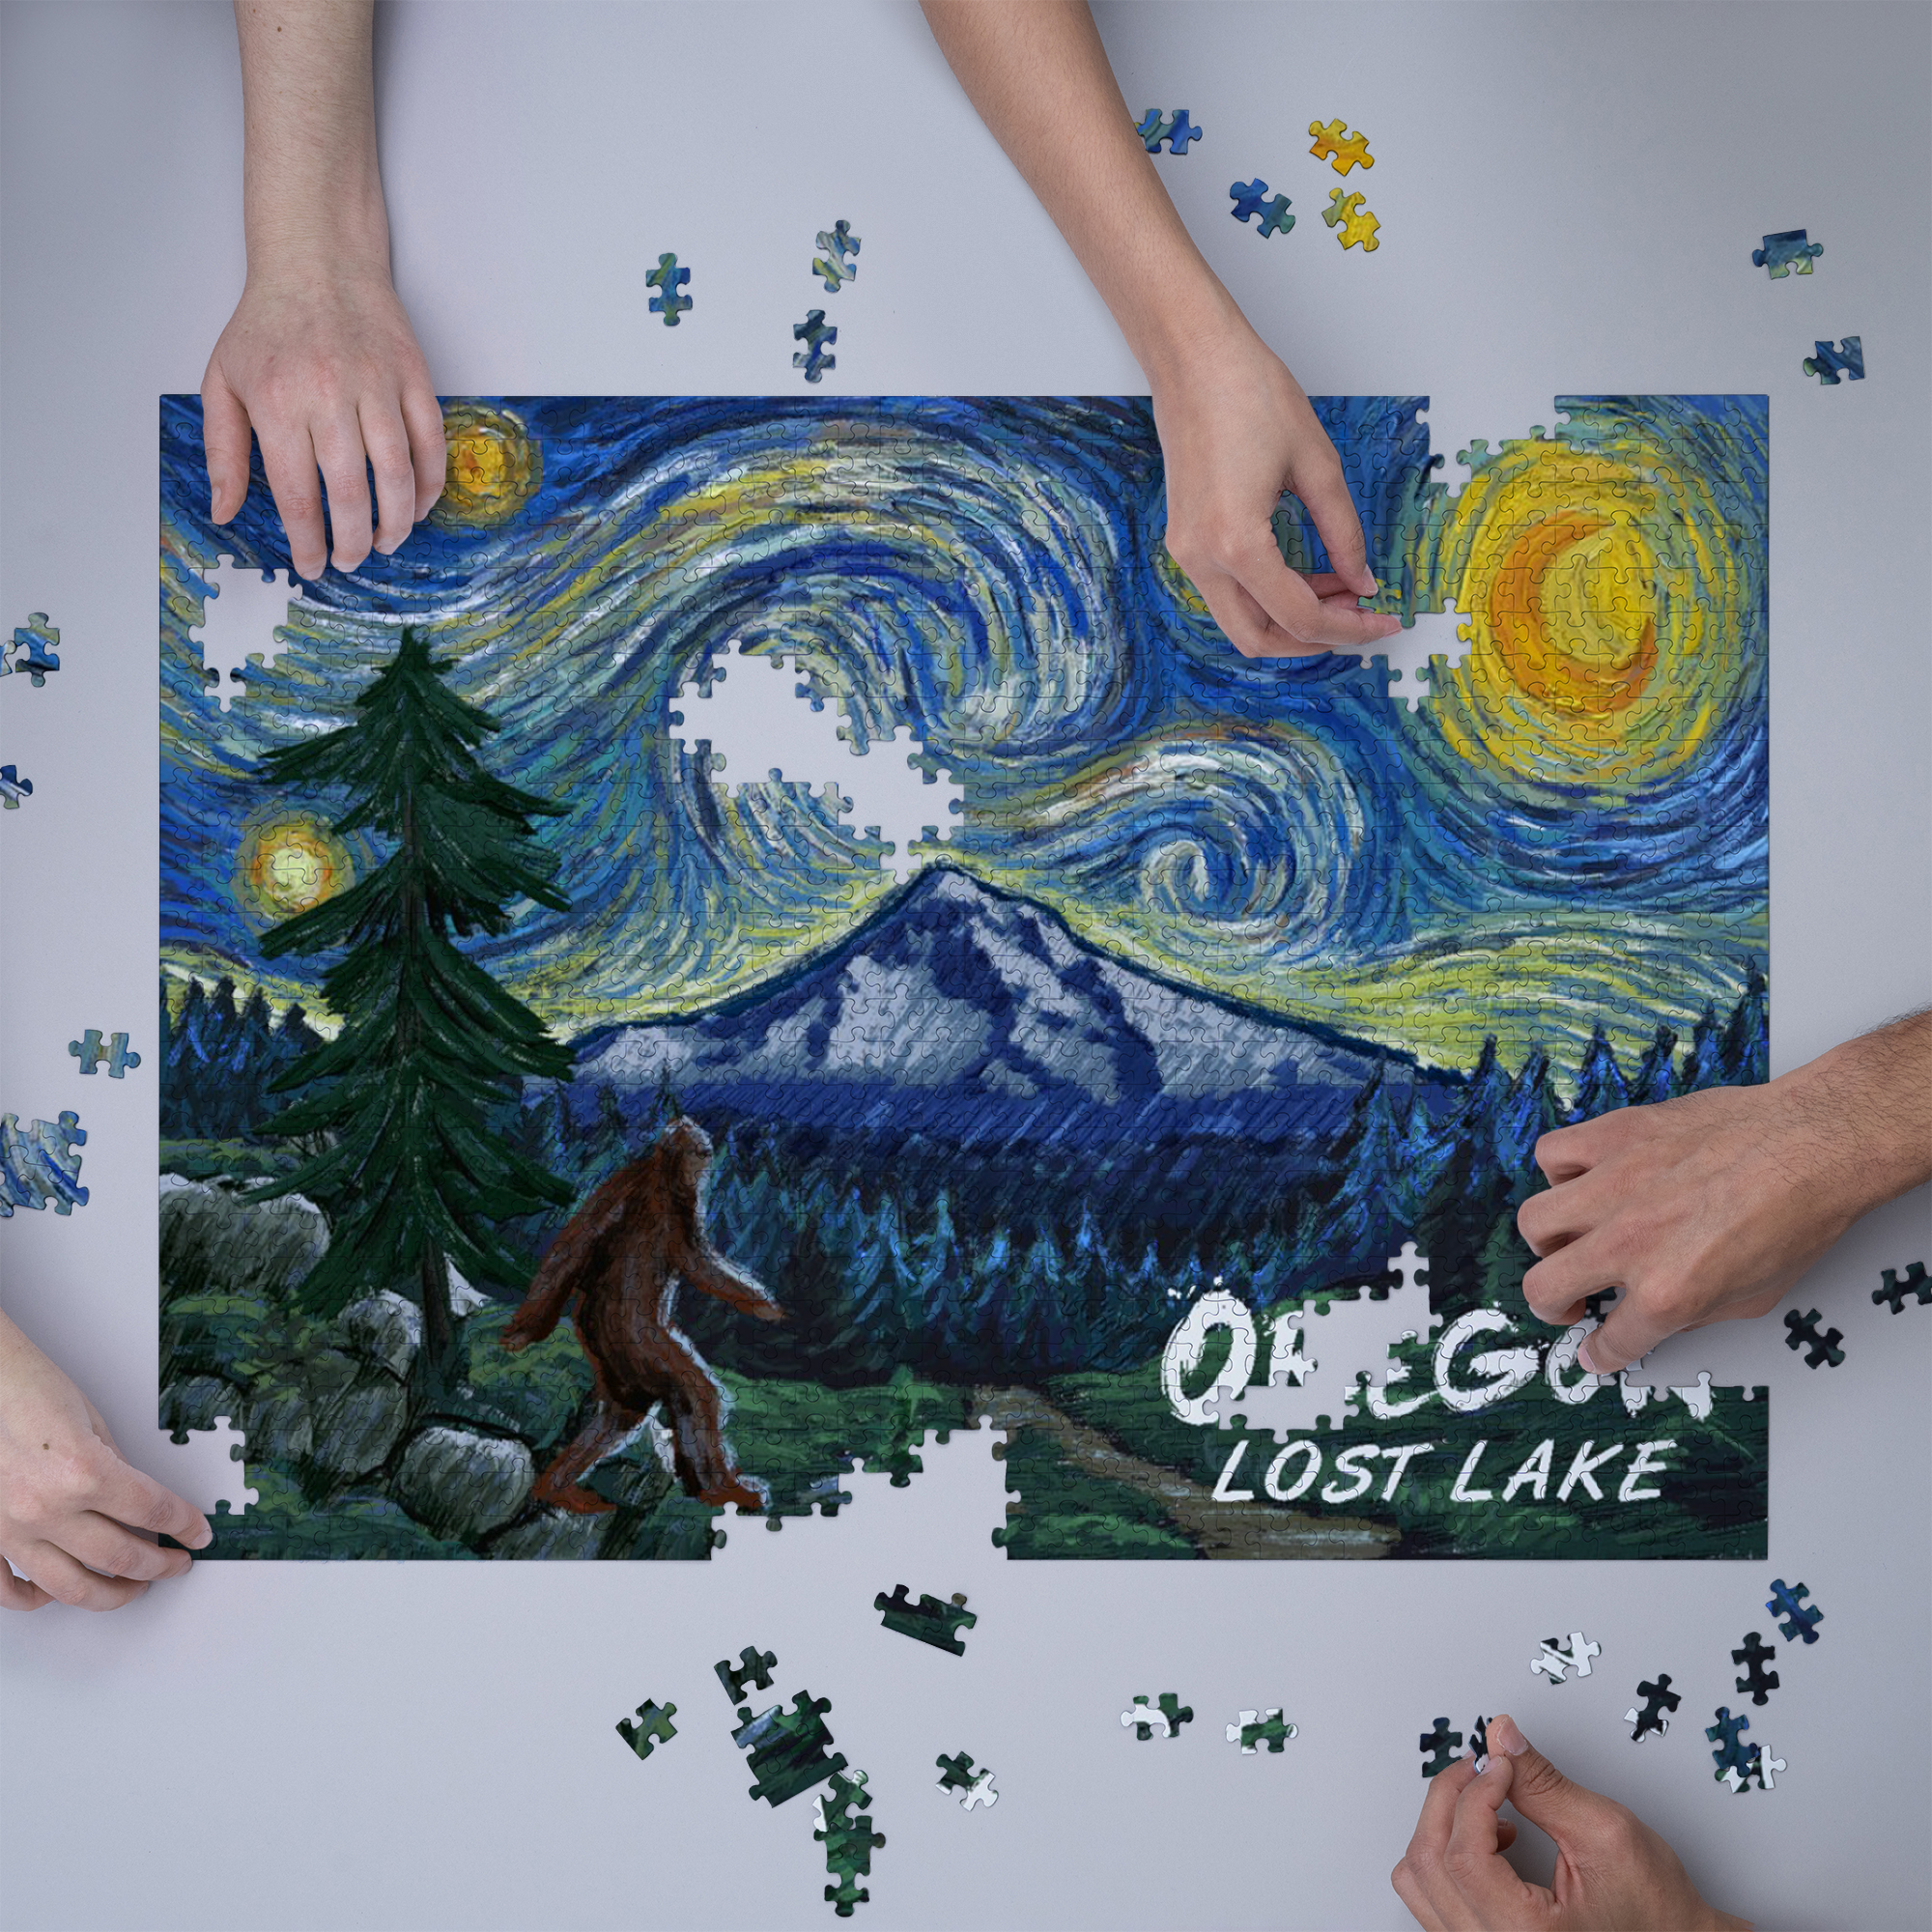 Lost Lake, Oregon, Bigfoot, Mt Hood, Starry Night (1000 Piece Puzzle, Size 19x27, Challenging Jigsaw Puzzle for Adults and Family, Made in USA) - image 3 of 4